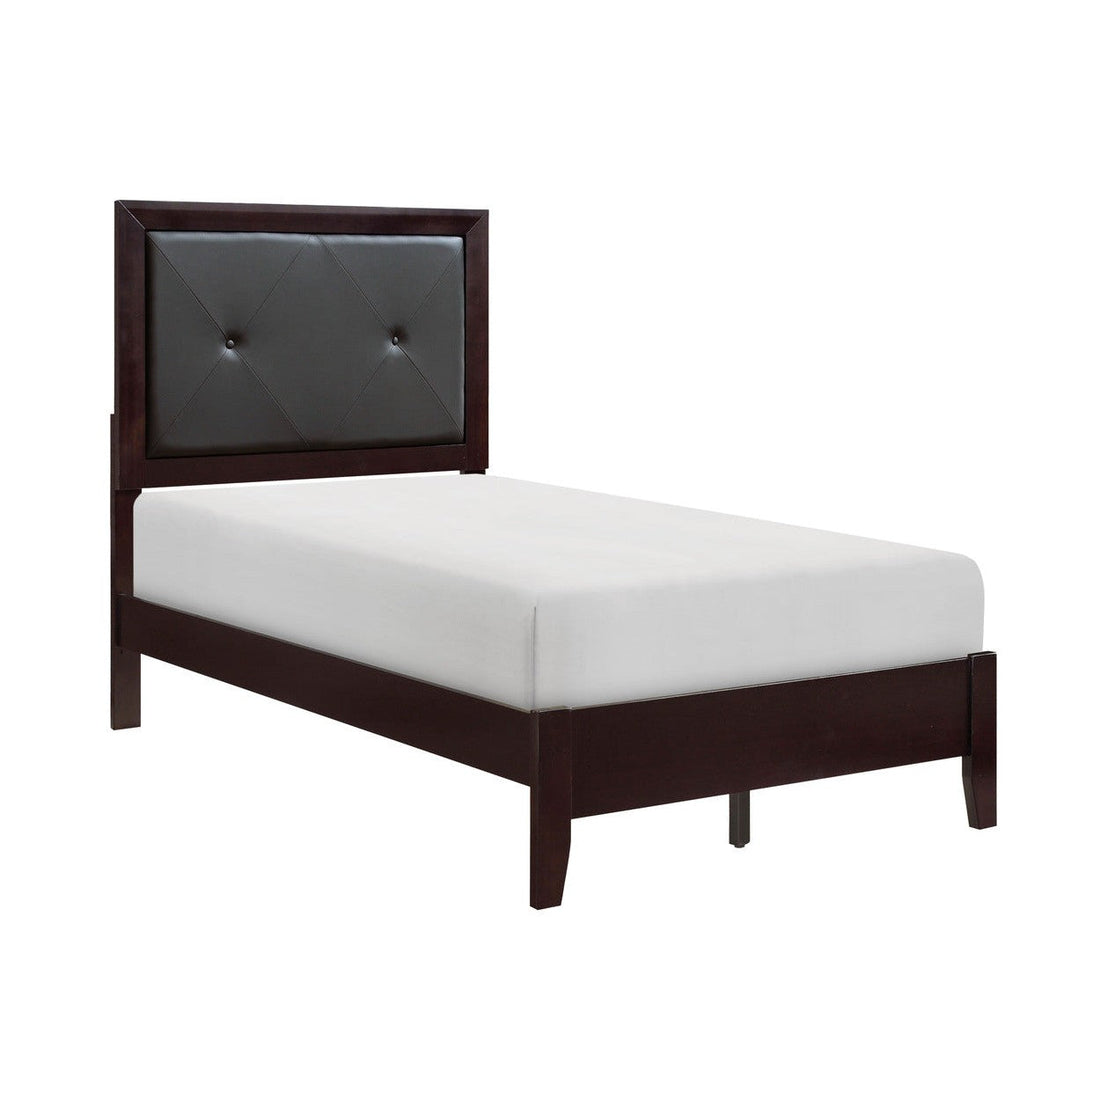 (3) TWIN BED, PVC HB 2145T-1*